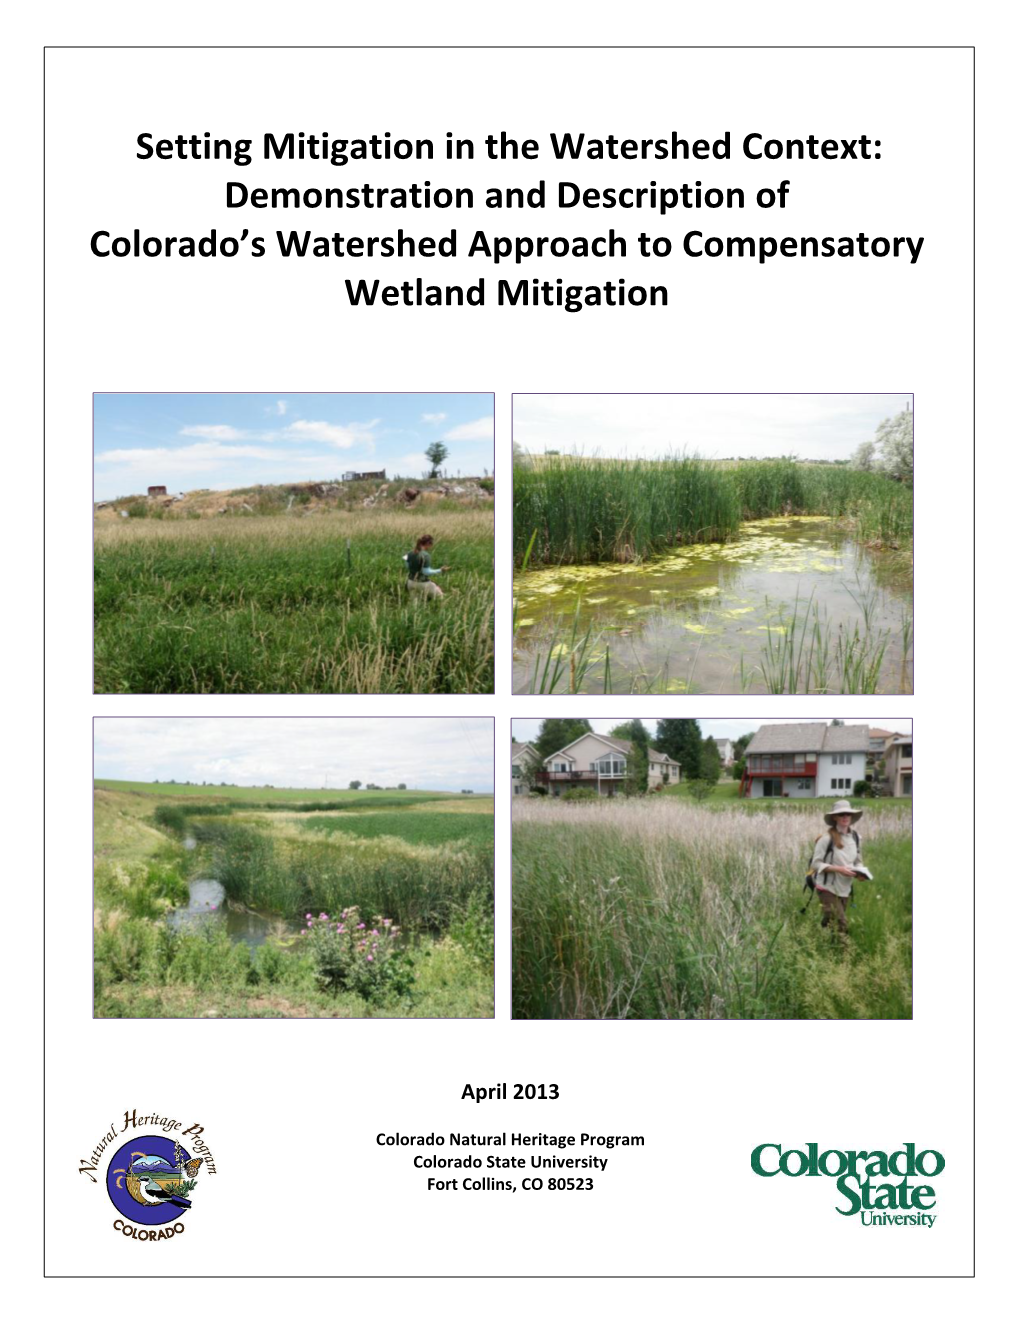 Setting Mitigation in the Watershed Context: Demonstration and Description of Colorado’S Watershed Approach to Compensatory Wetland Mitigation